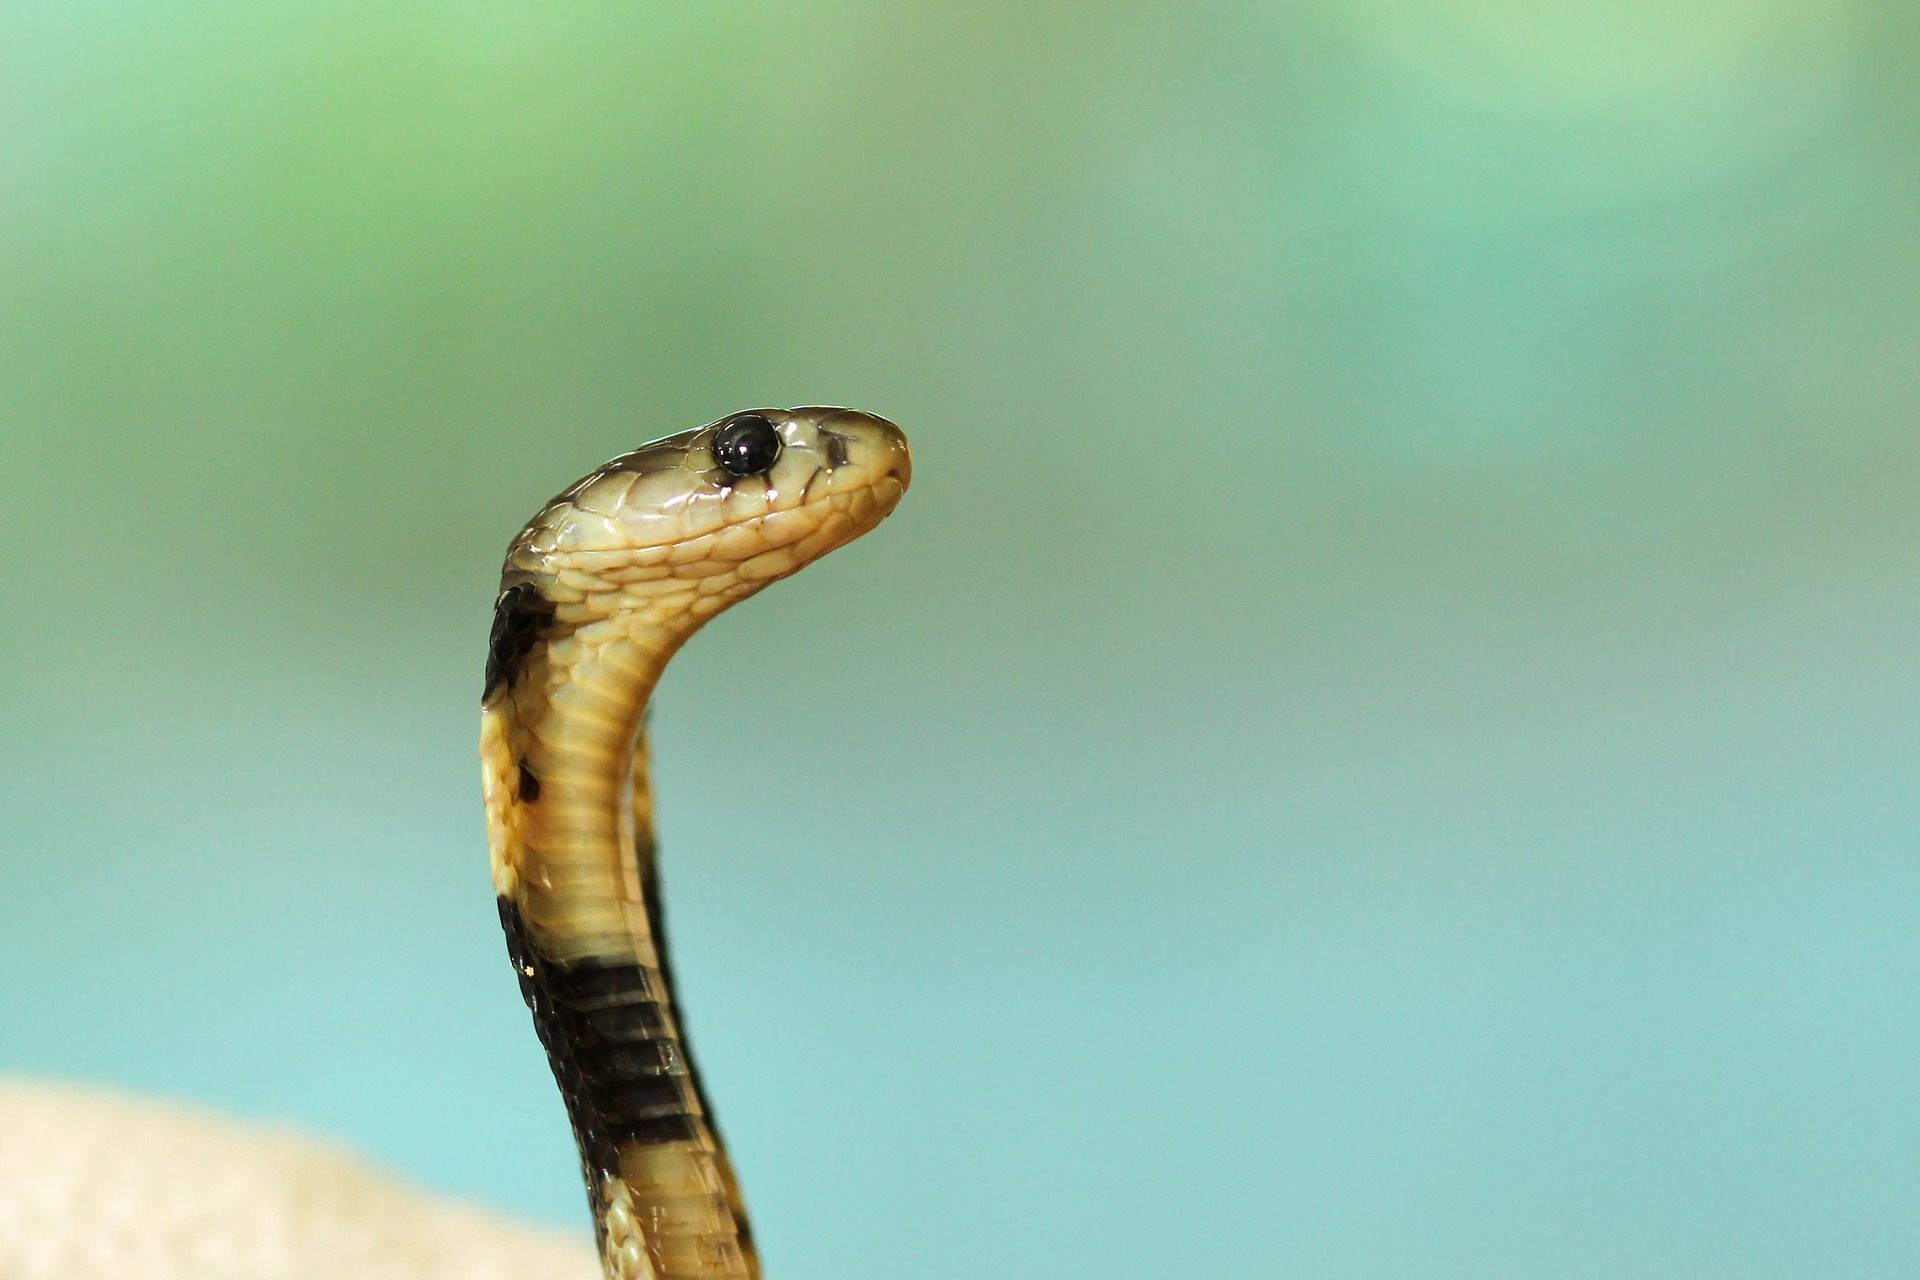 Cute Baby Snake Wallpapers